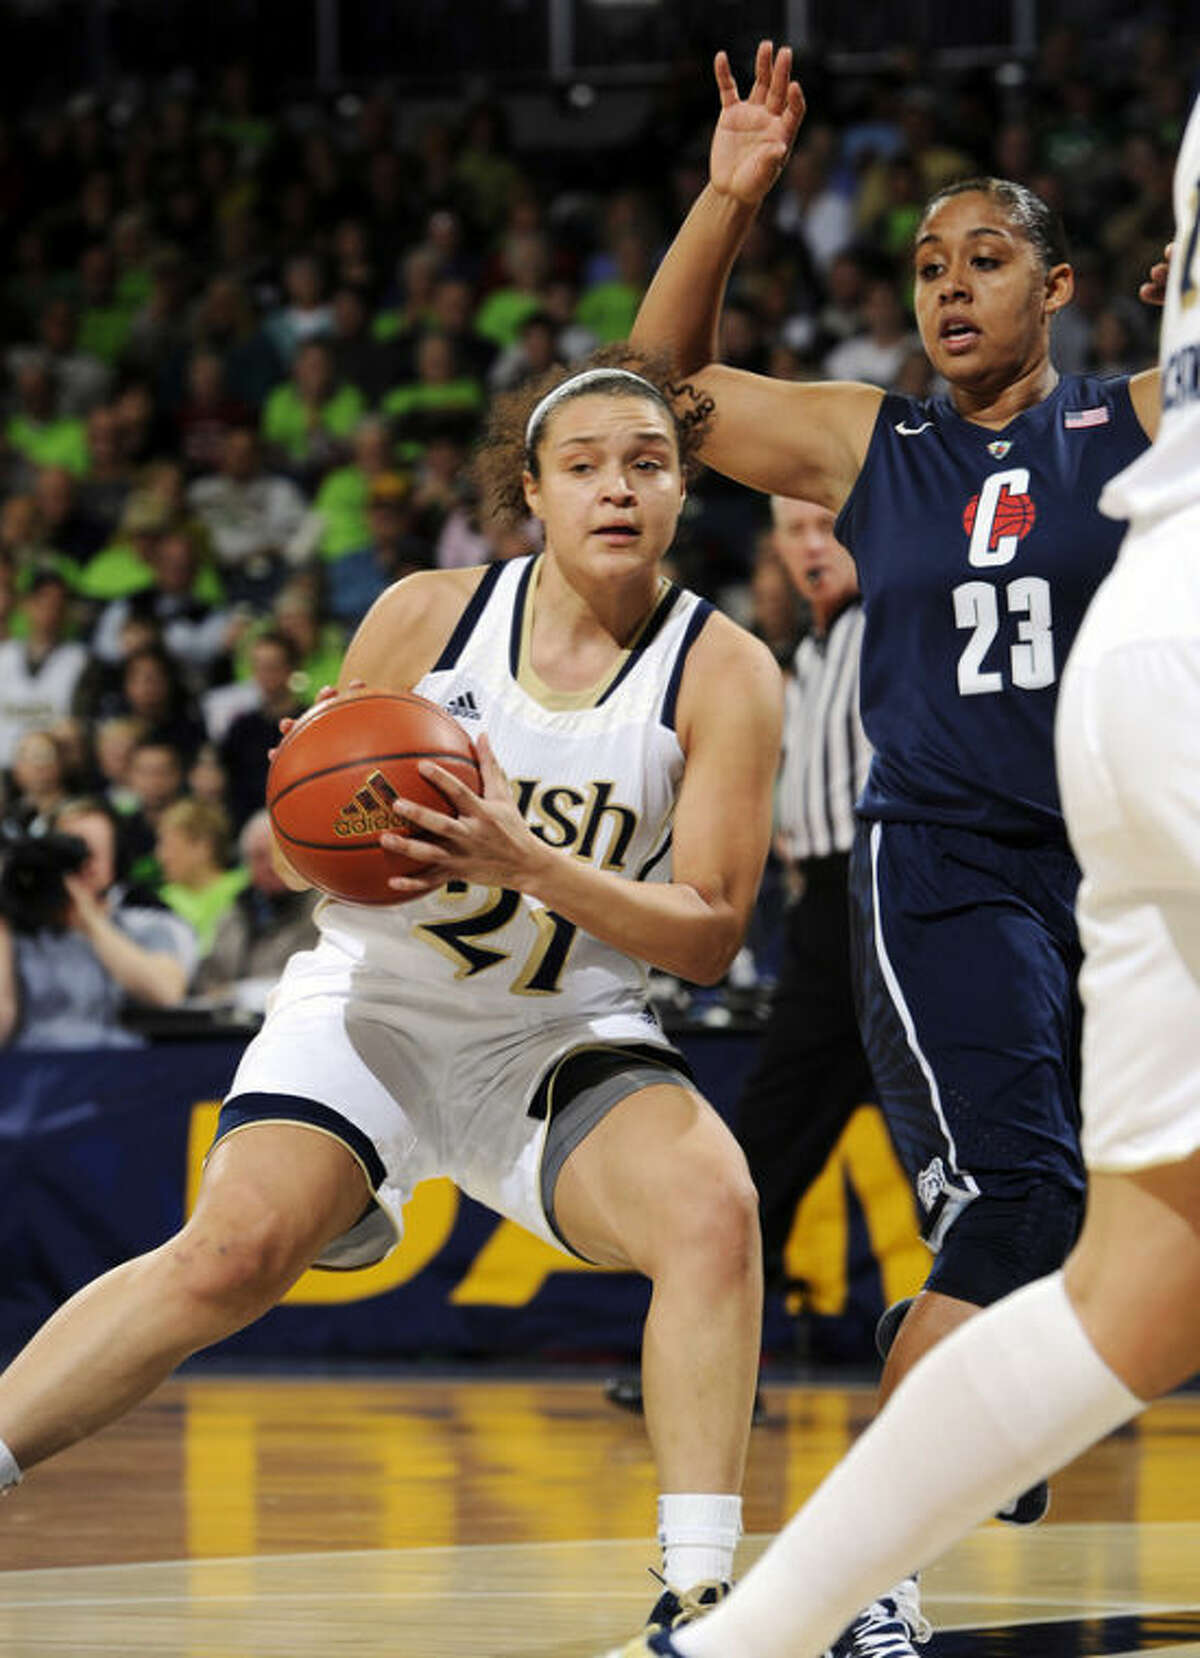 Notre Dame guard Kayla McBride, left, throws a pass around Connecticut guard Kaleena Mosqueda-Lewis during the first half of an NCAA college basketball game, Monday, March 4, 2013, in South Bend, Ind. (AP Photo/Joe Raymond)